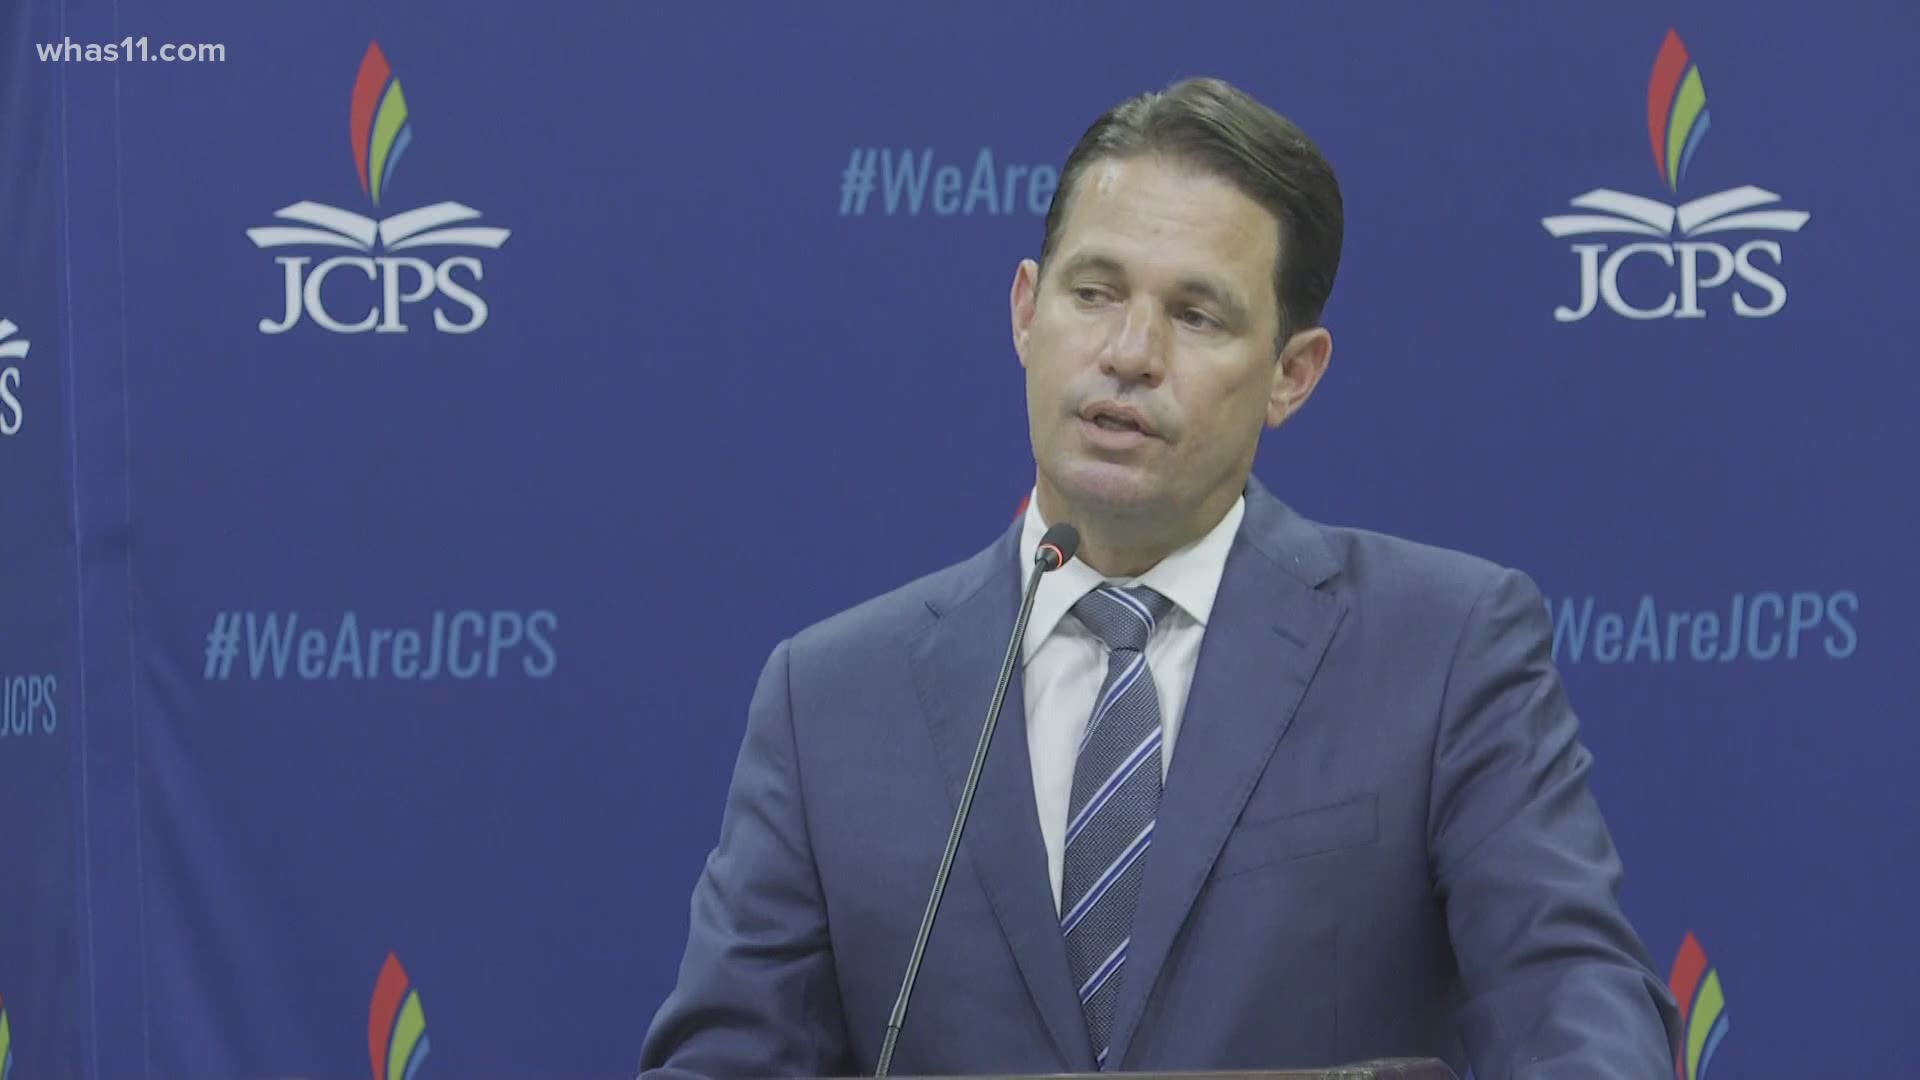 "When I stop and think about what's the safest option for our community our staff and our students the decision is clear," Dr. Marty Pollio said.